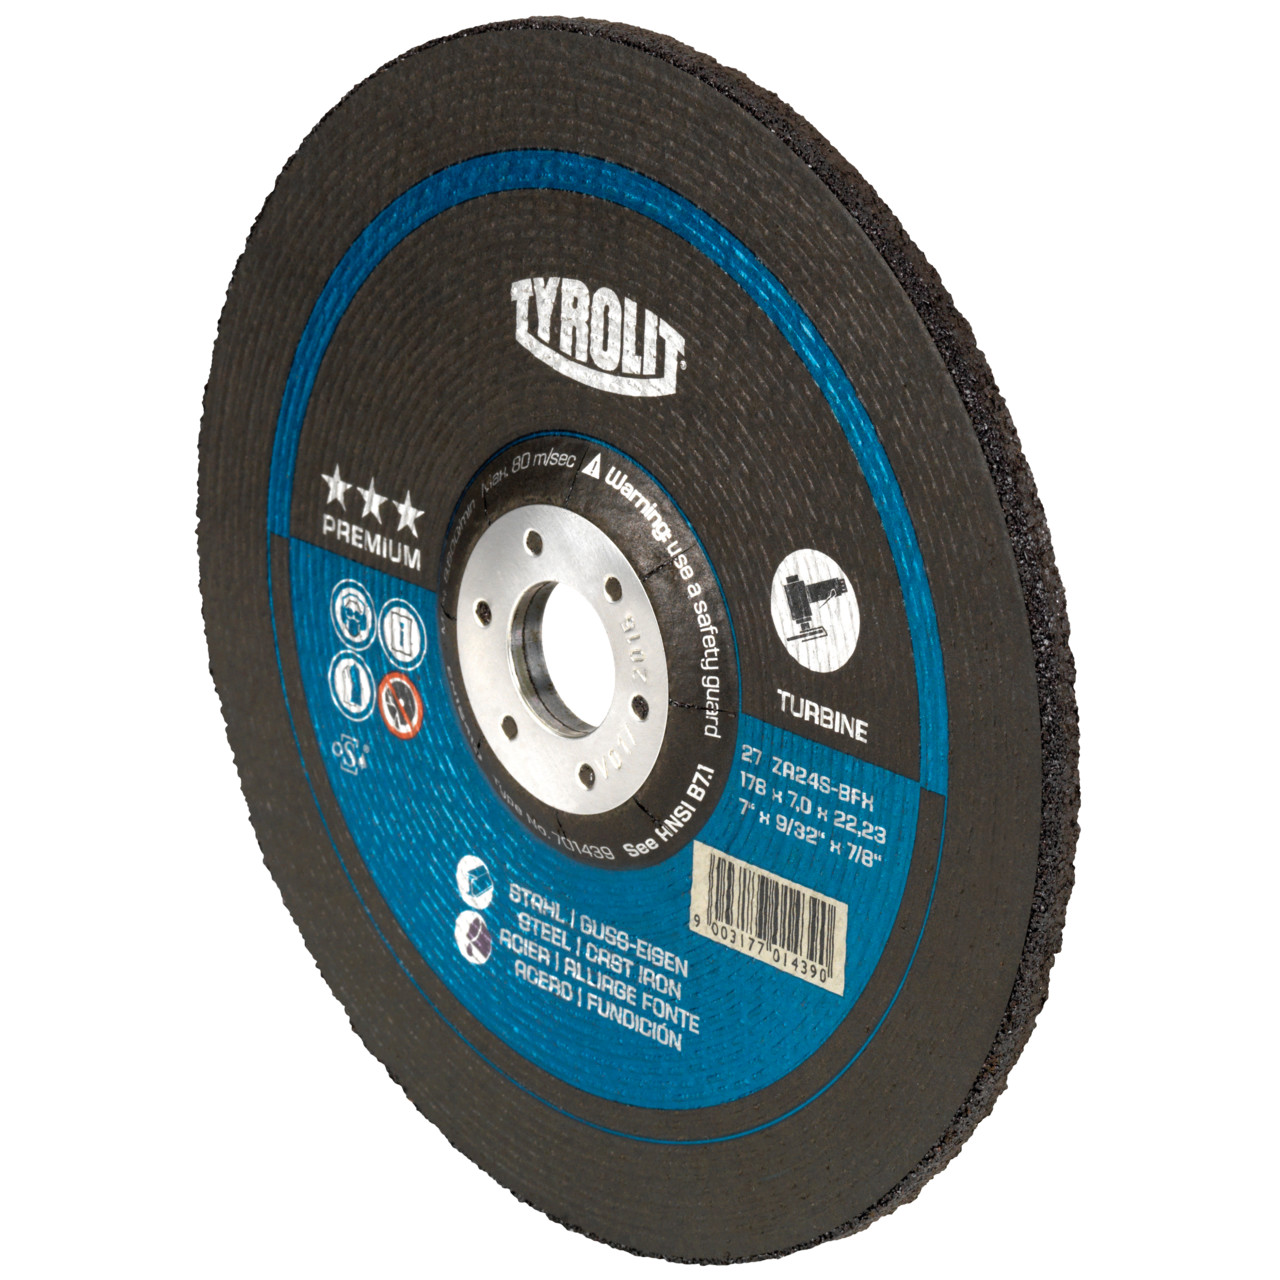 TYROLIT grinding disc DxUxH 125x7x22.23 T-GRIND for steel and cast iron, shape: 27 - offset version, Art. 701518